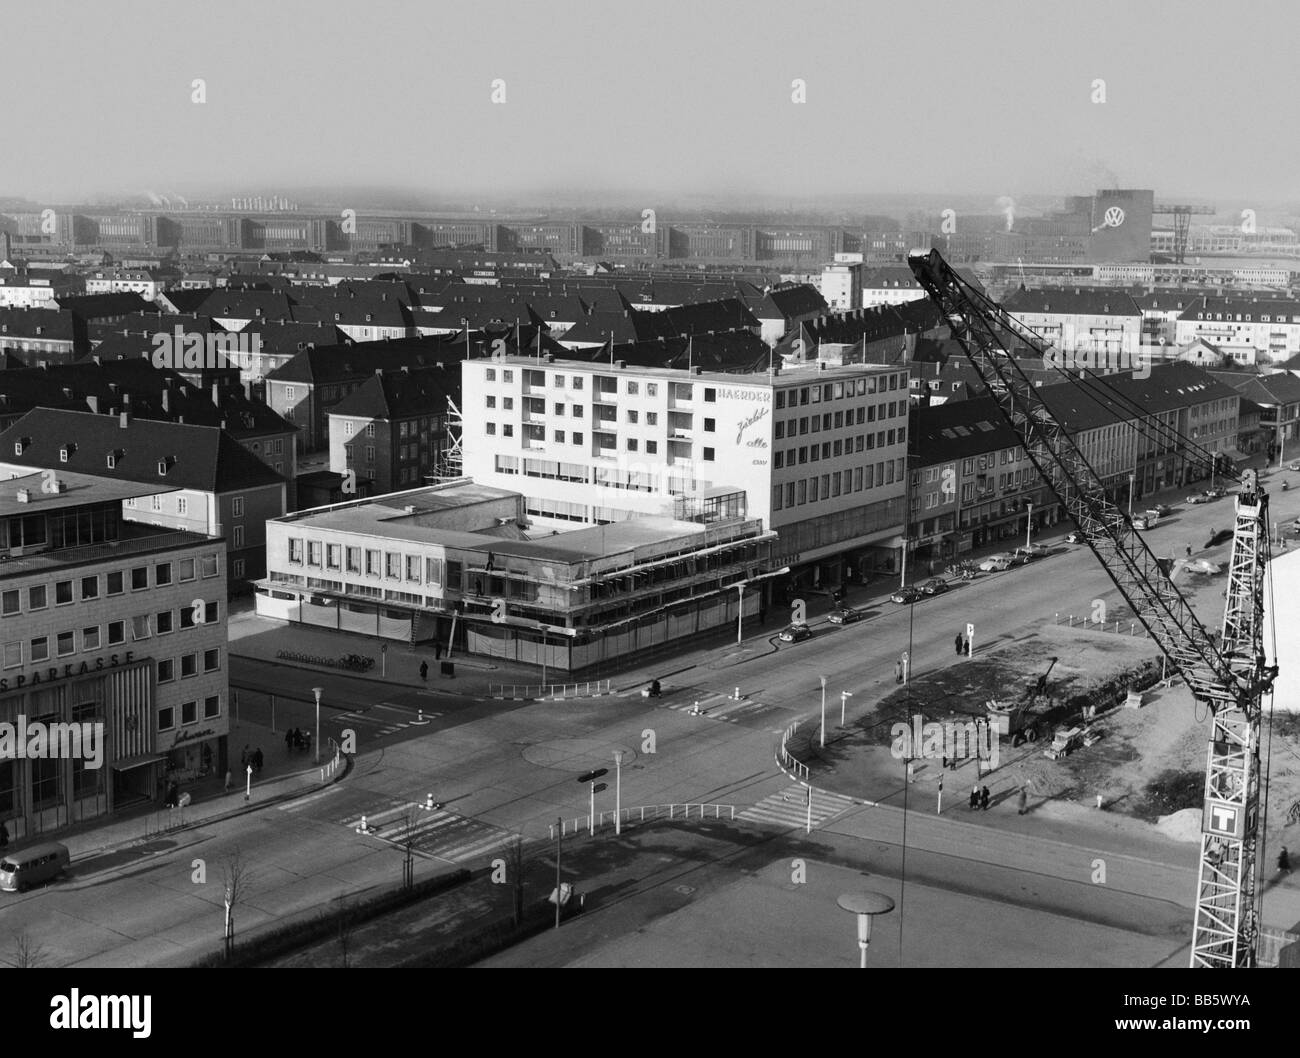 goegraphy / travel, Germany, Wolfsburg, city views / cityscapes, view from 10th level of the town hall towards Volkswagen factory, circa 1957, Stock Photo